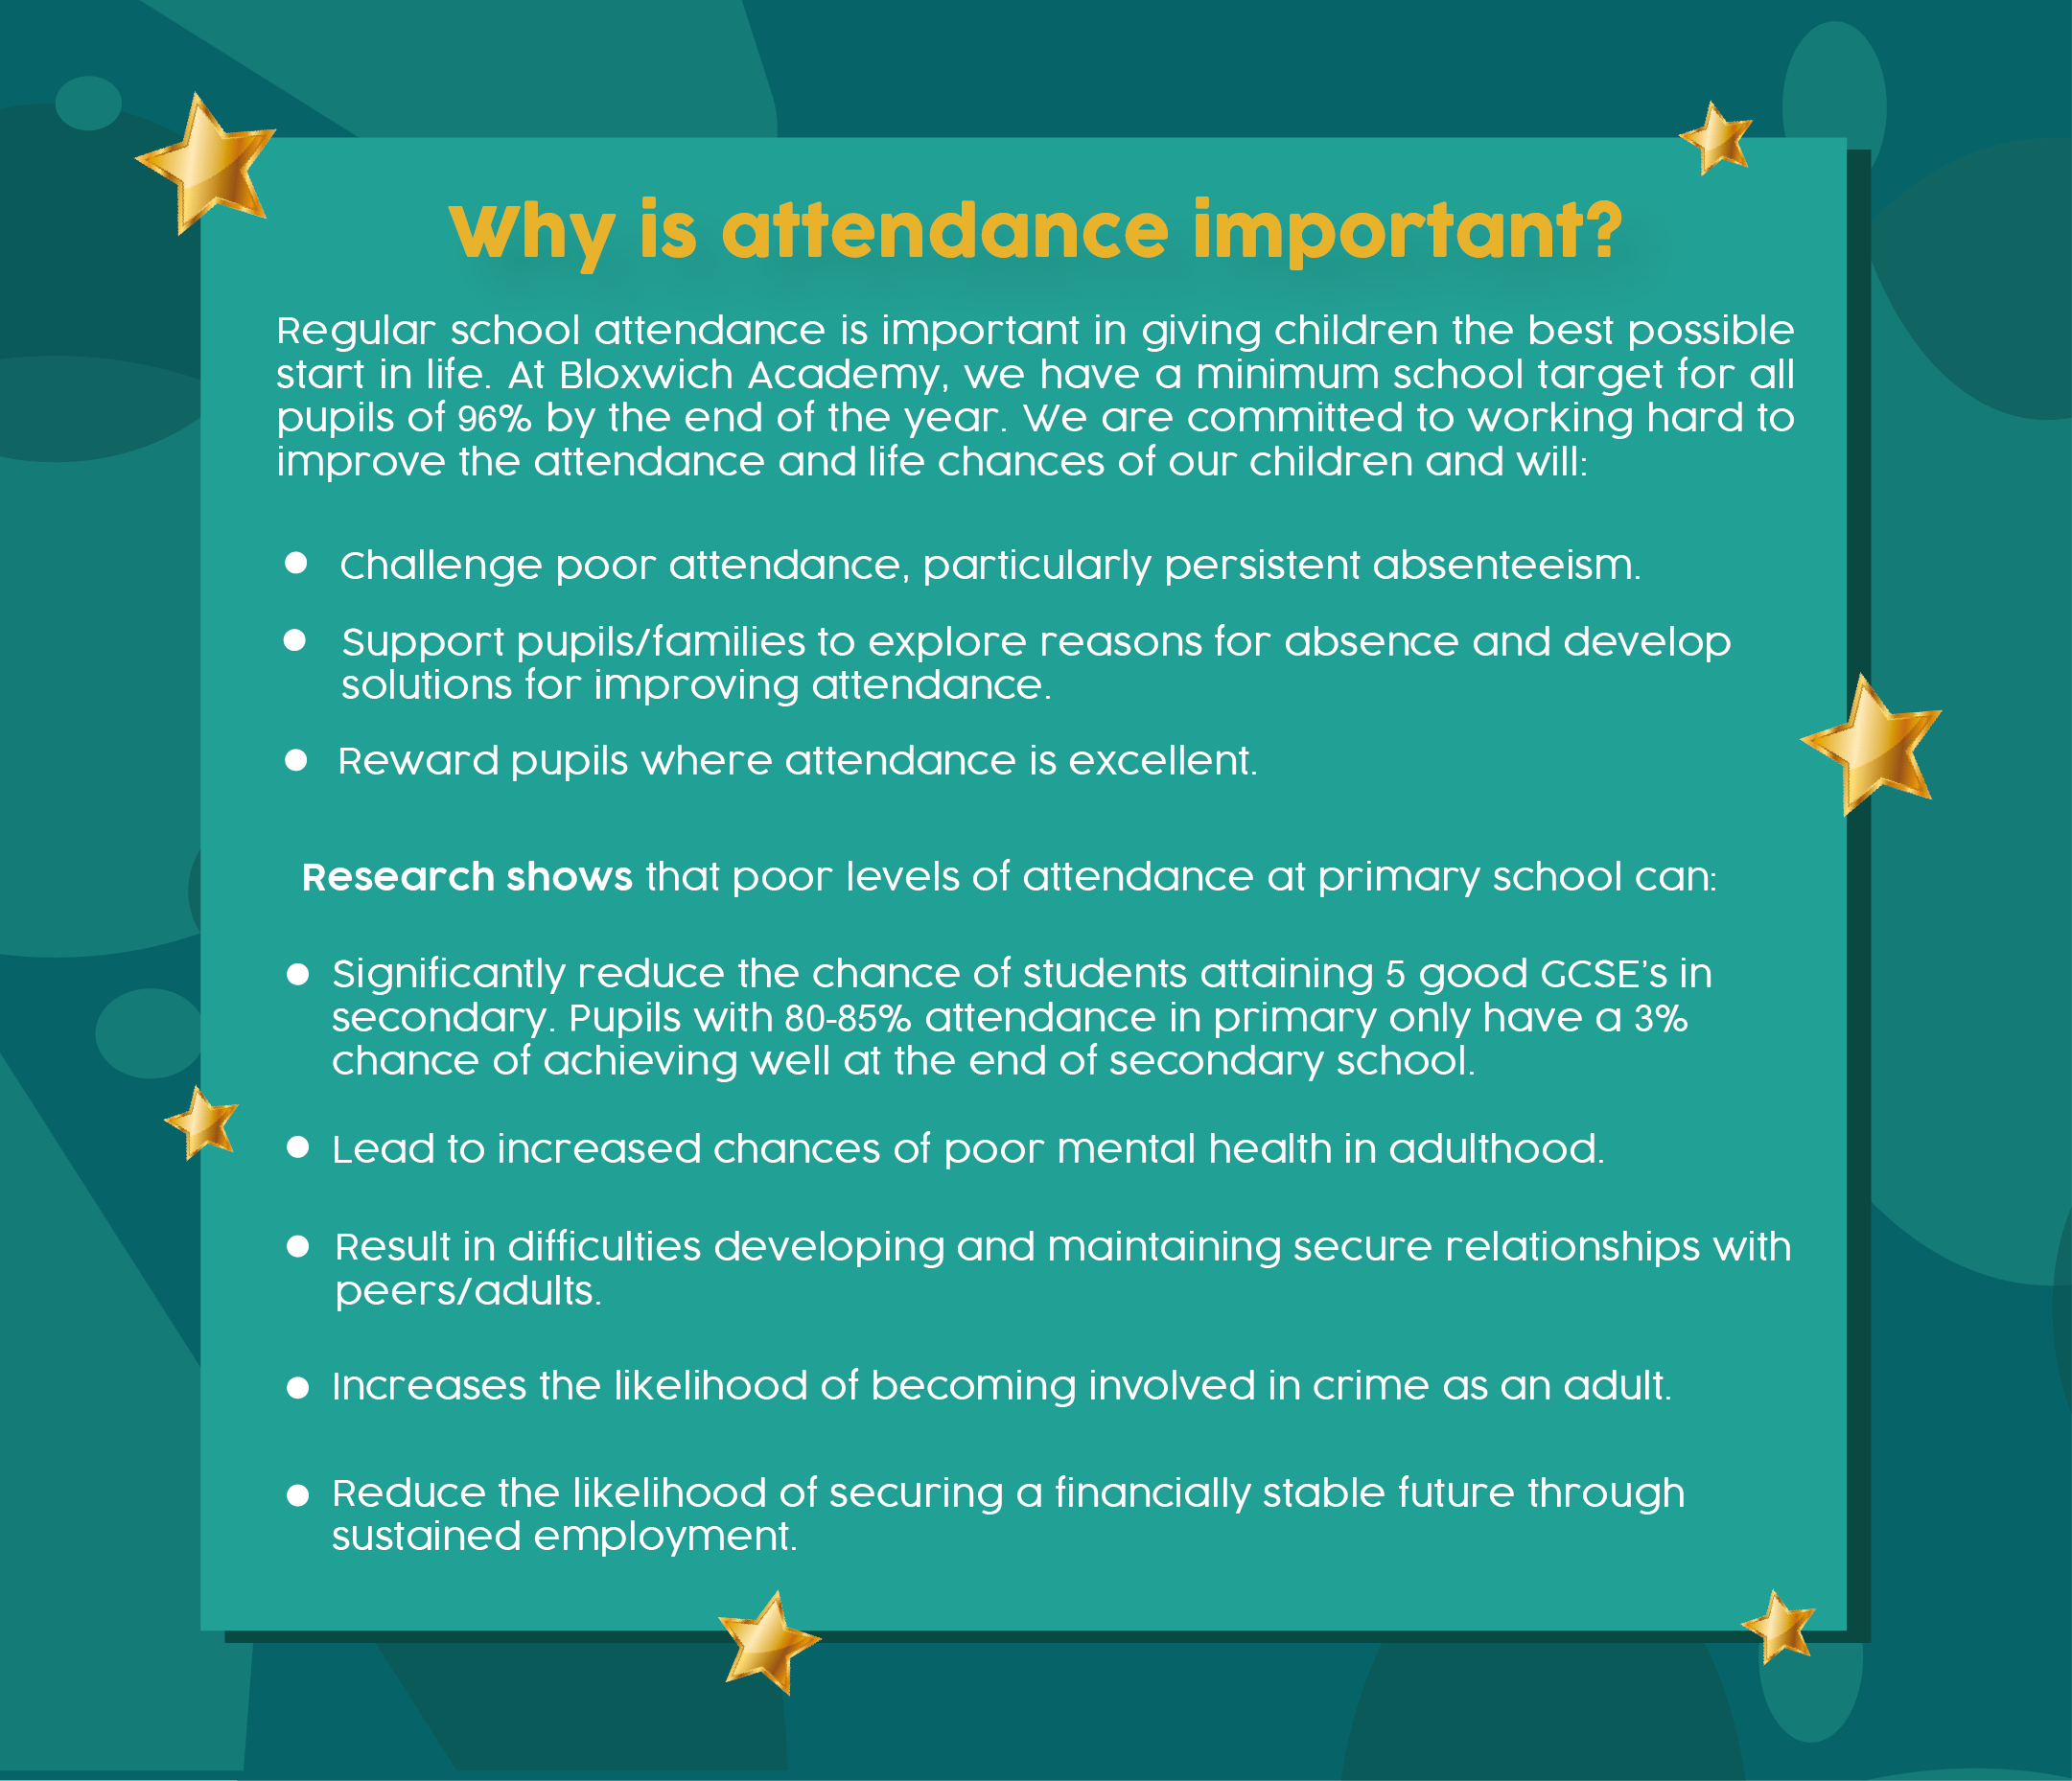 Why is attendance important